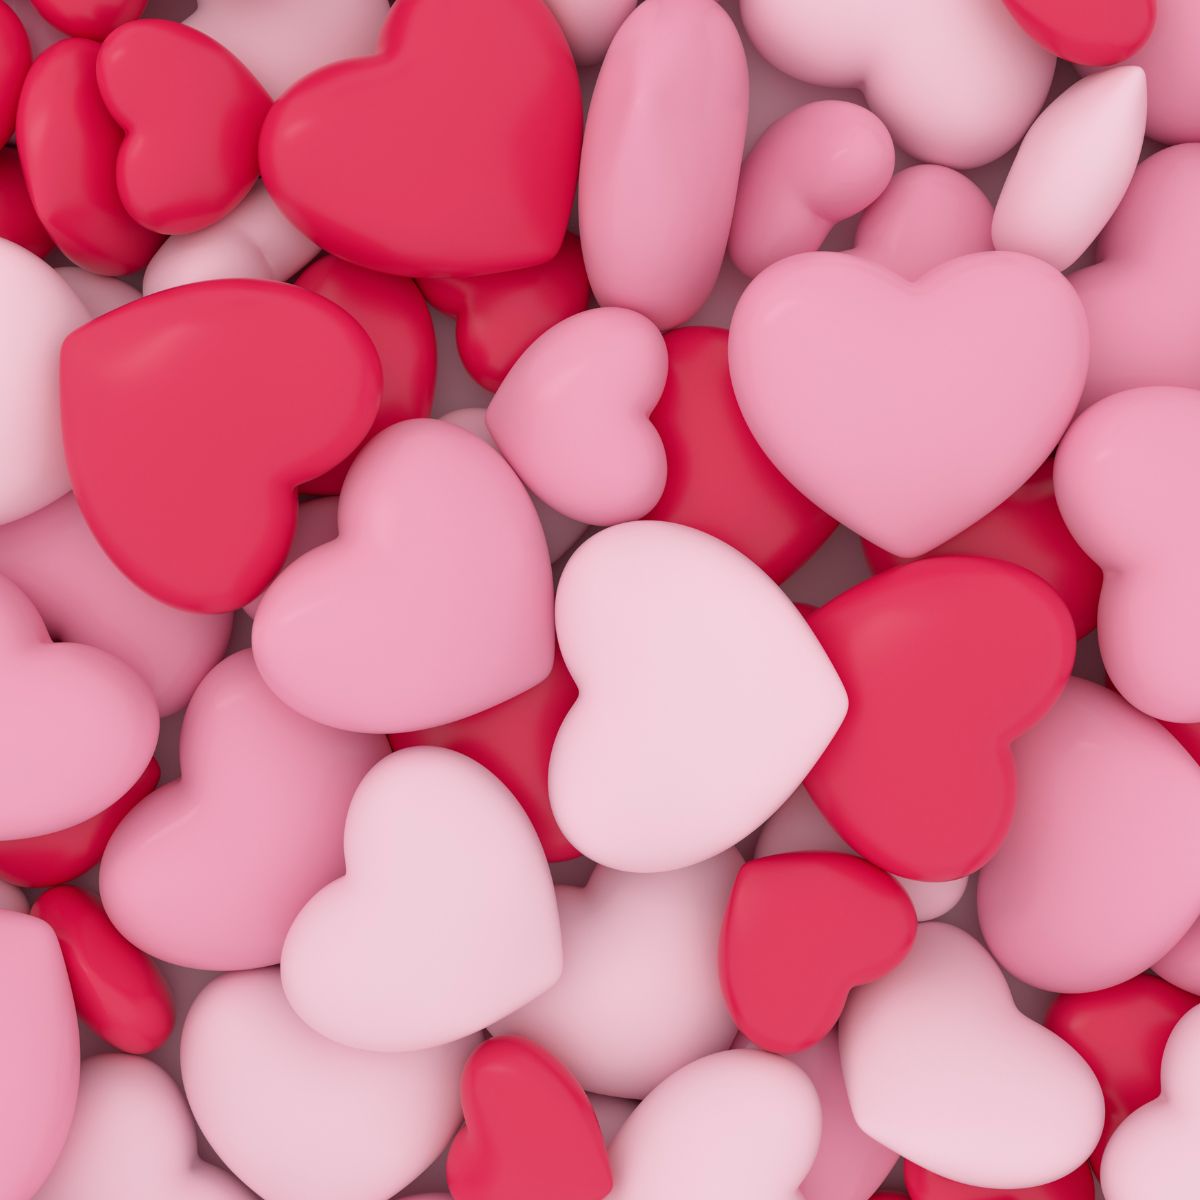 Hearts in a variety of colors and sizes